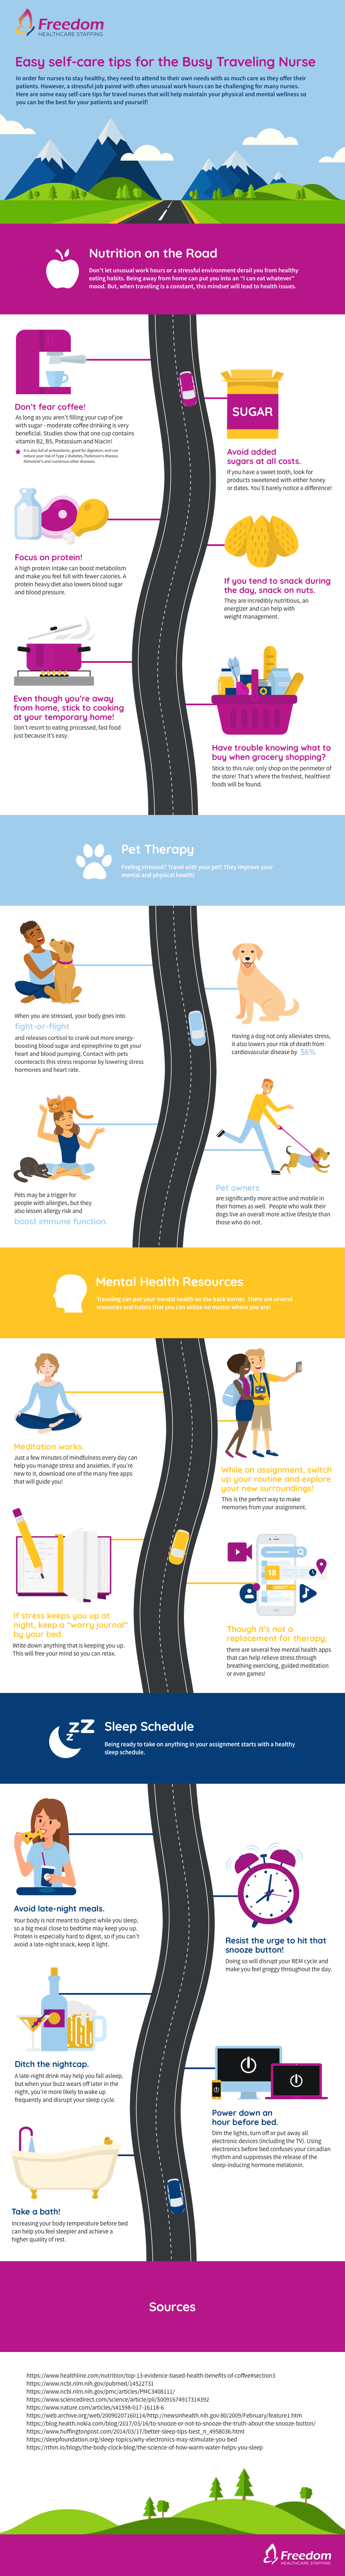 freedom healthcare self care tips infographic